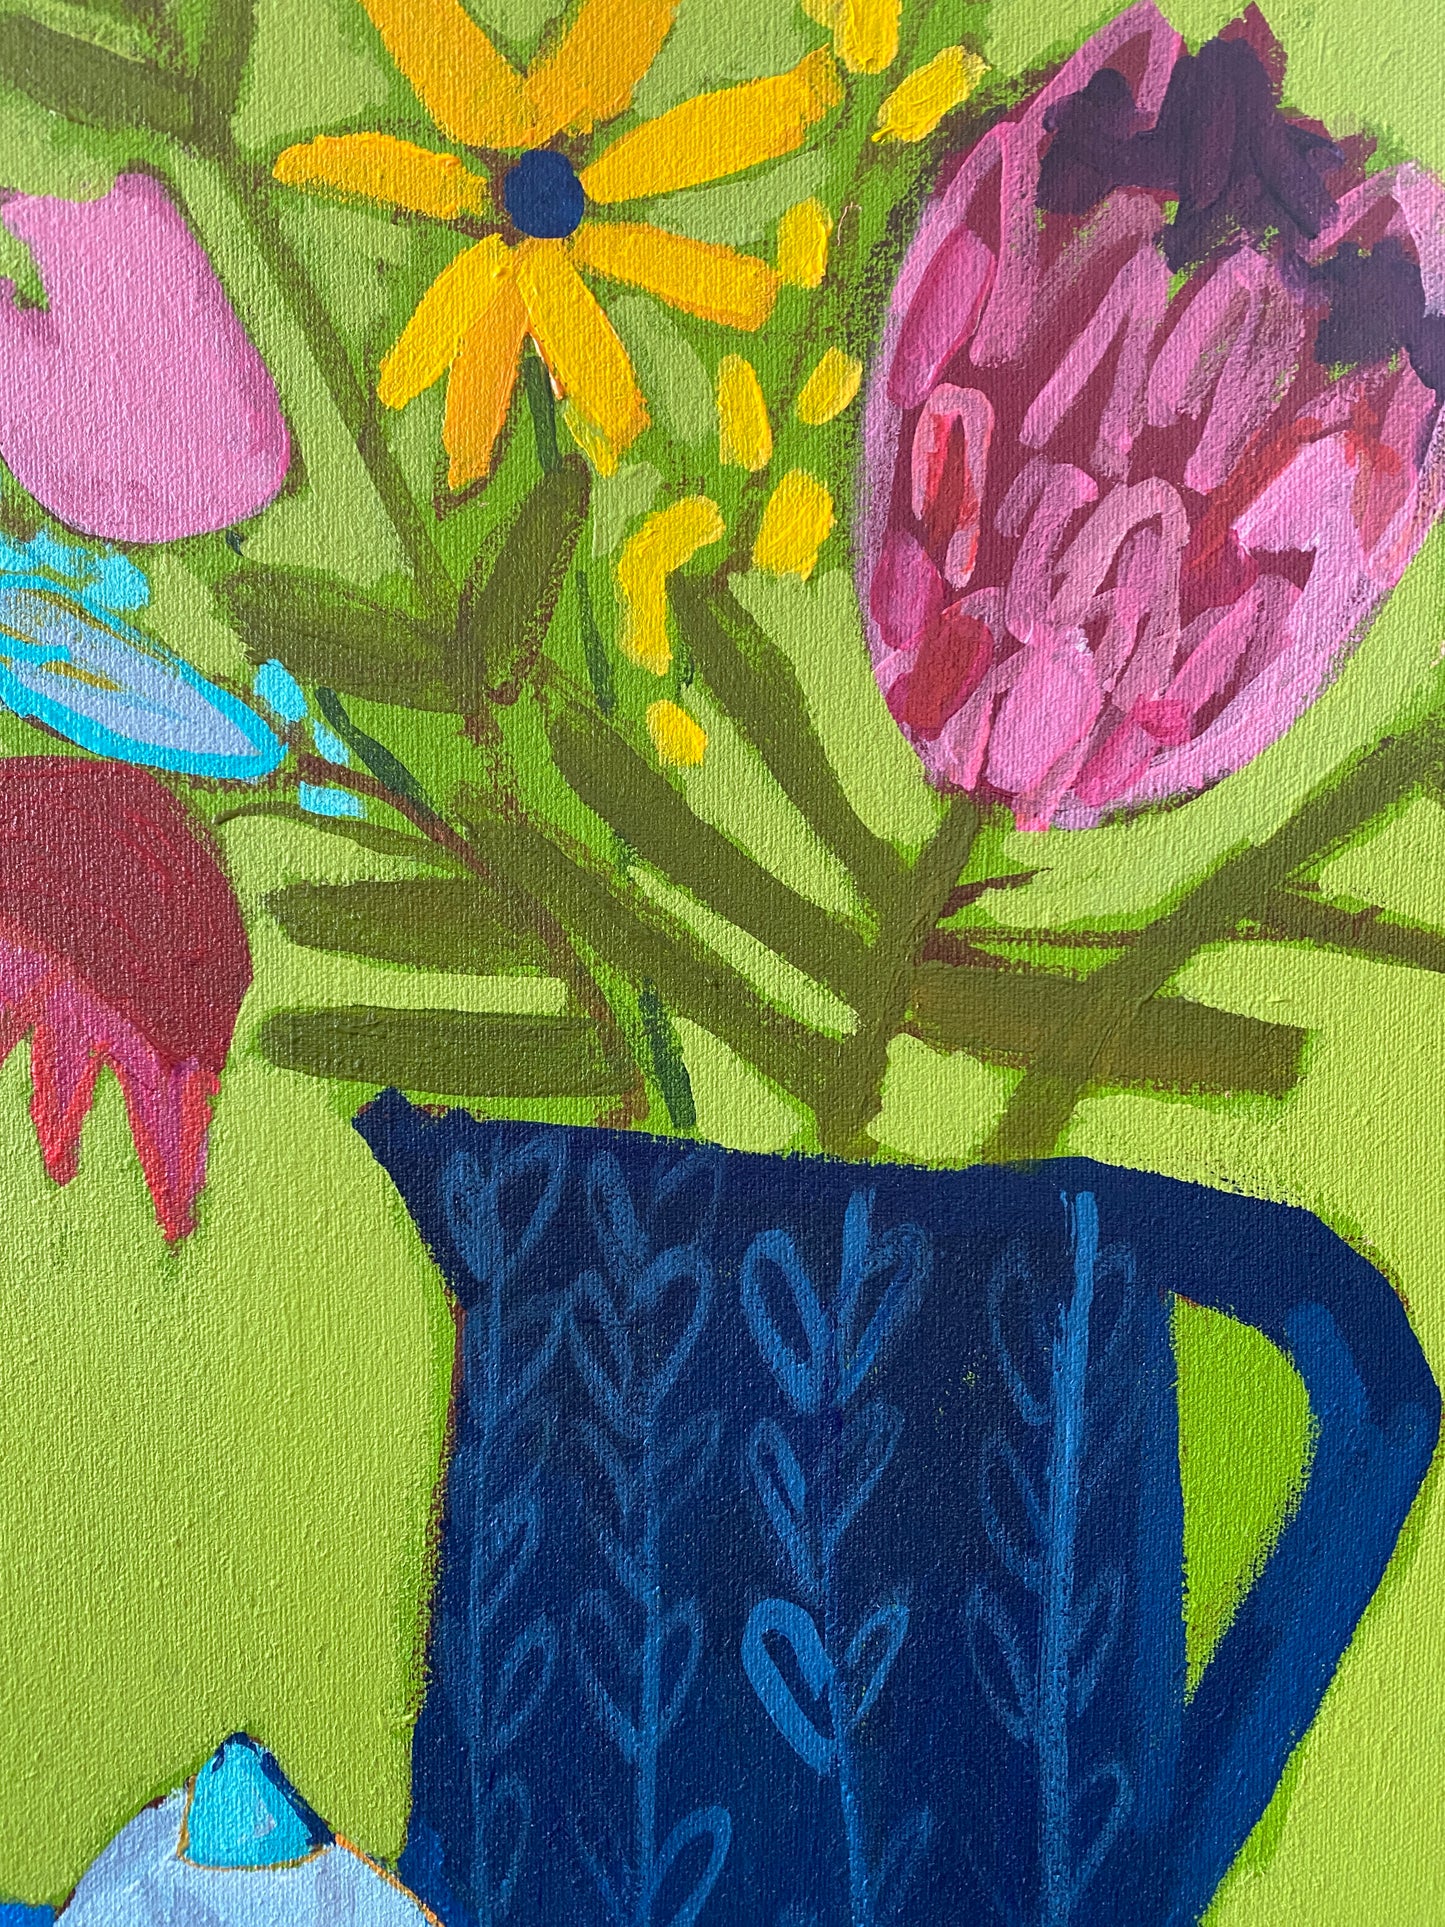 Original Wall Painting/ Afternoon Tea With Protea Flower/ 20”x24”